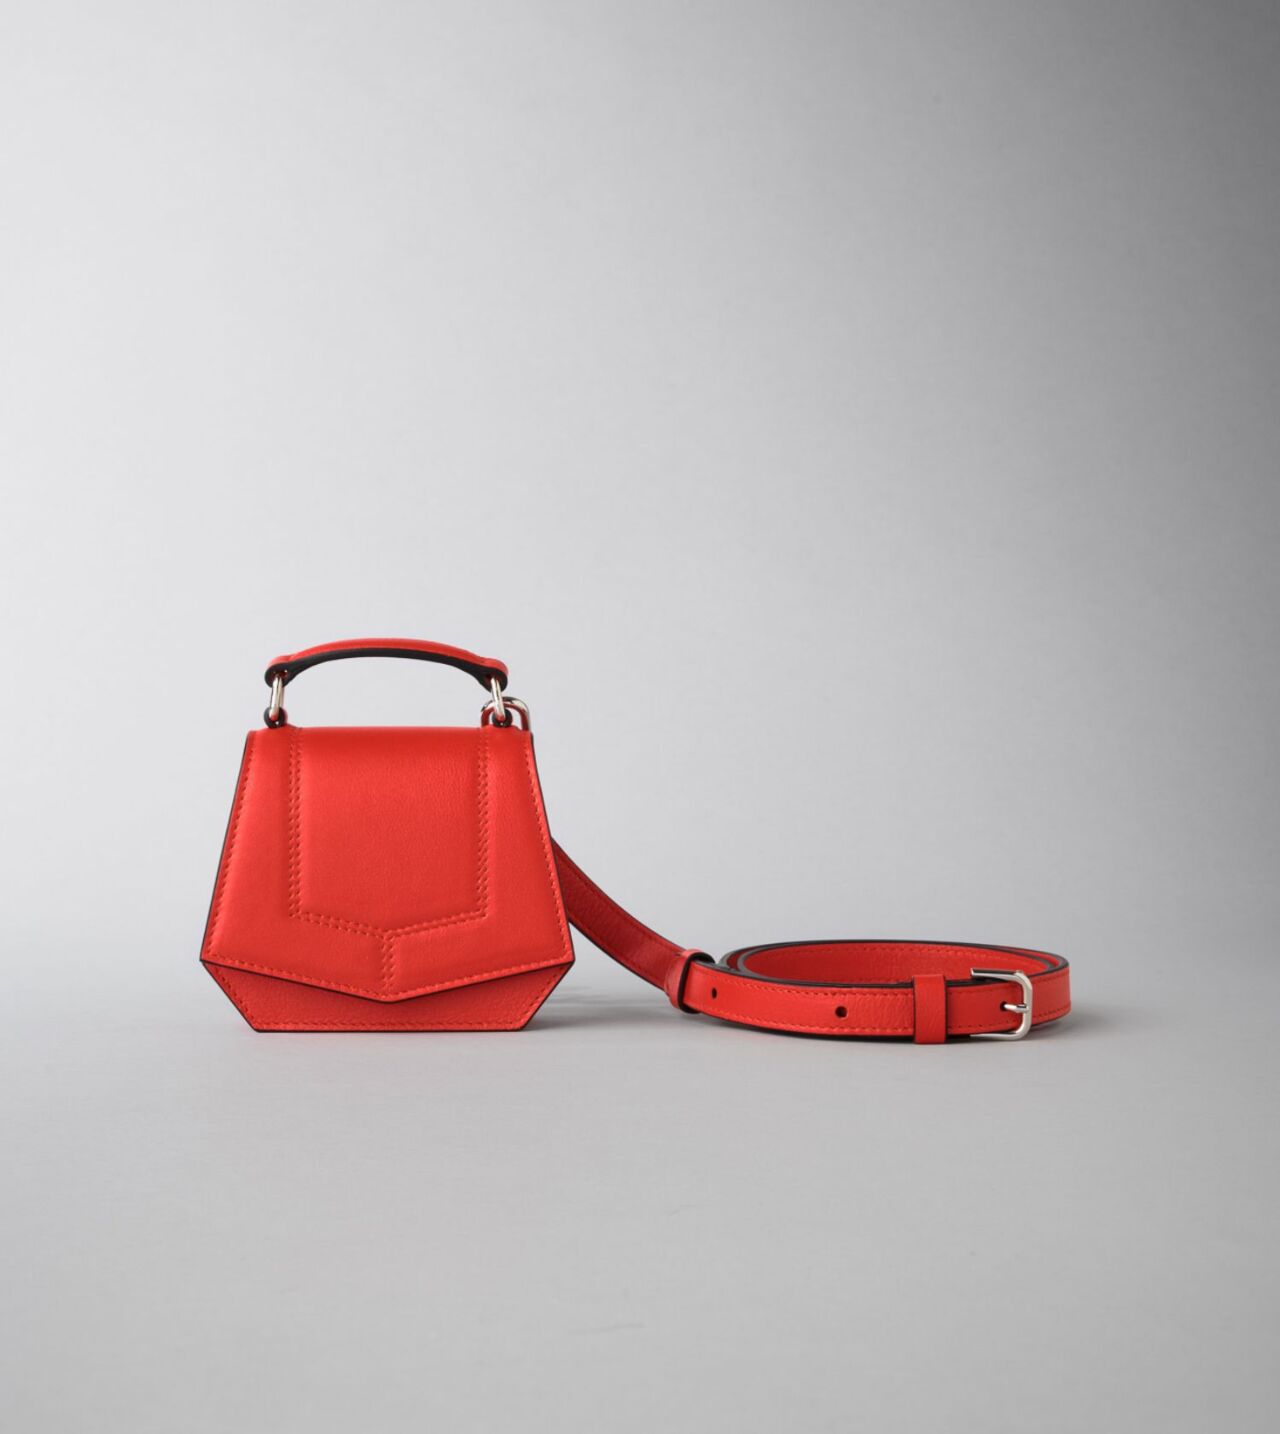 Blueprint Micro Bag in Bright Red Leather